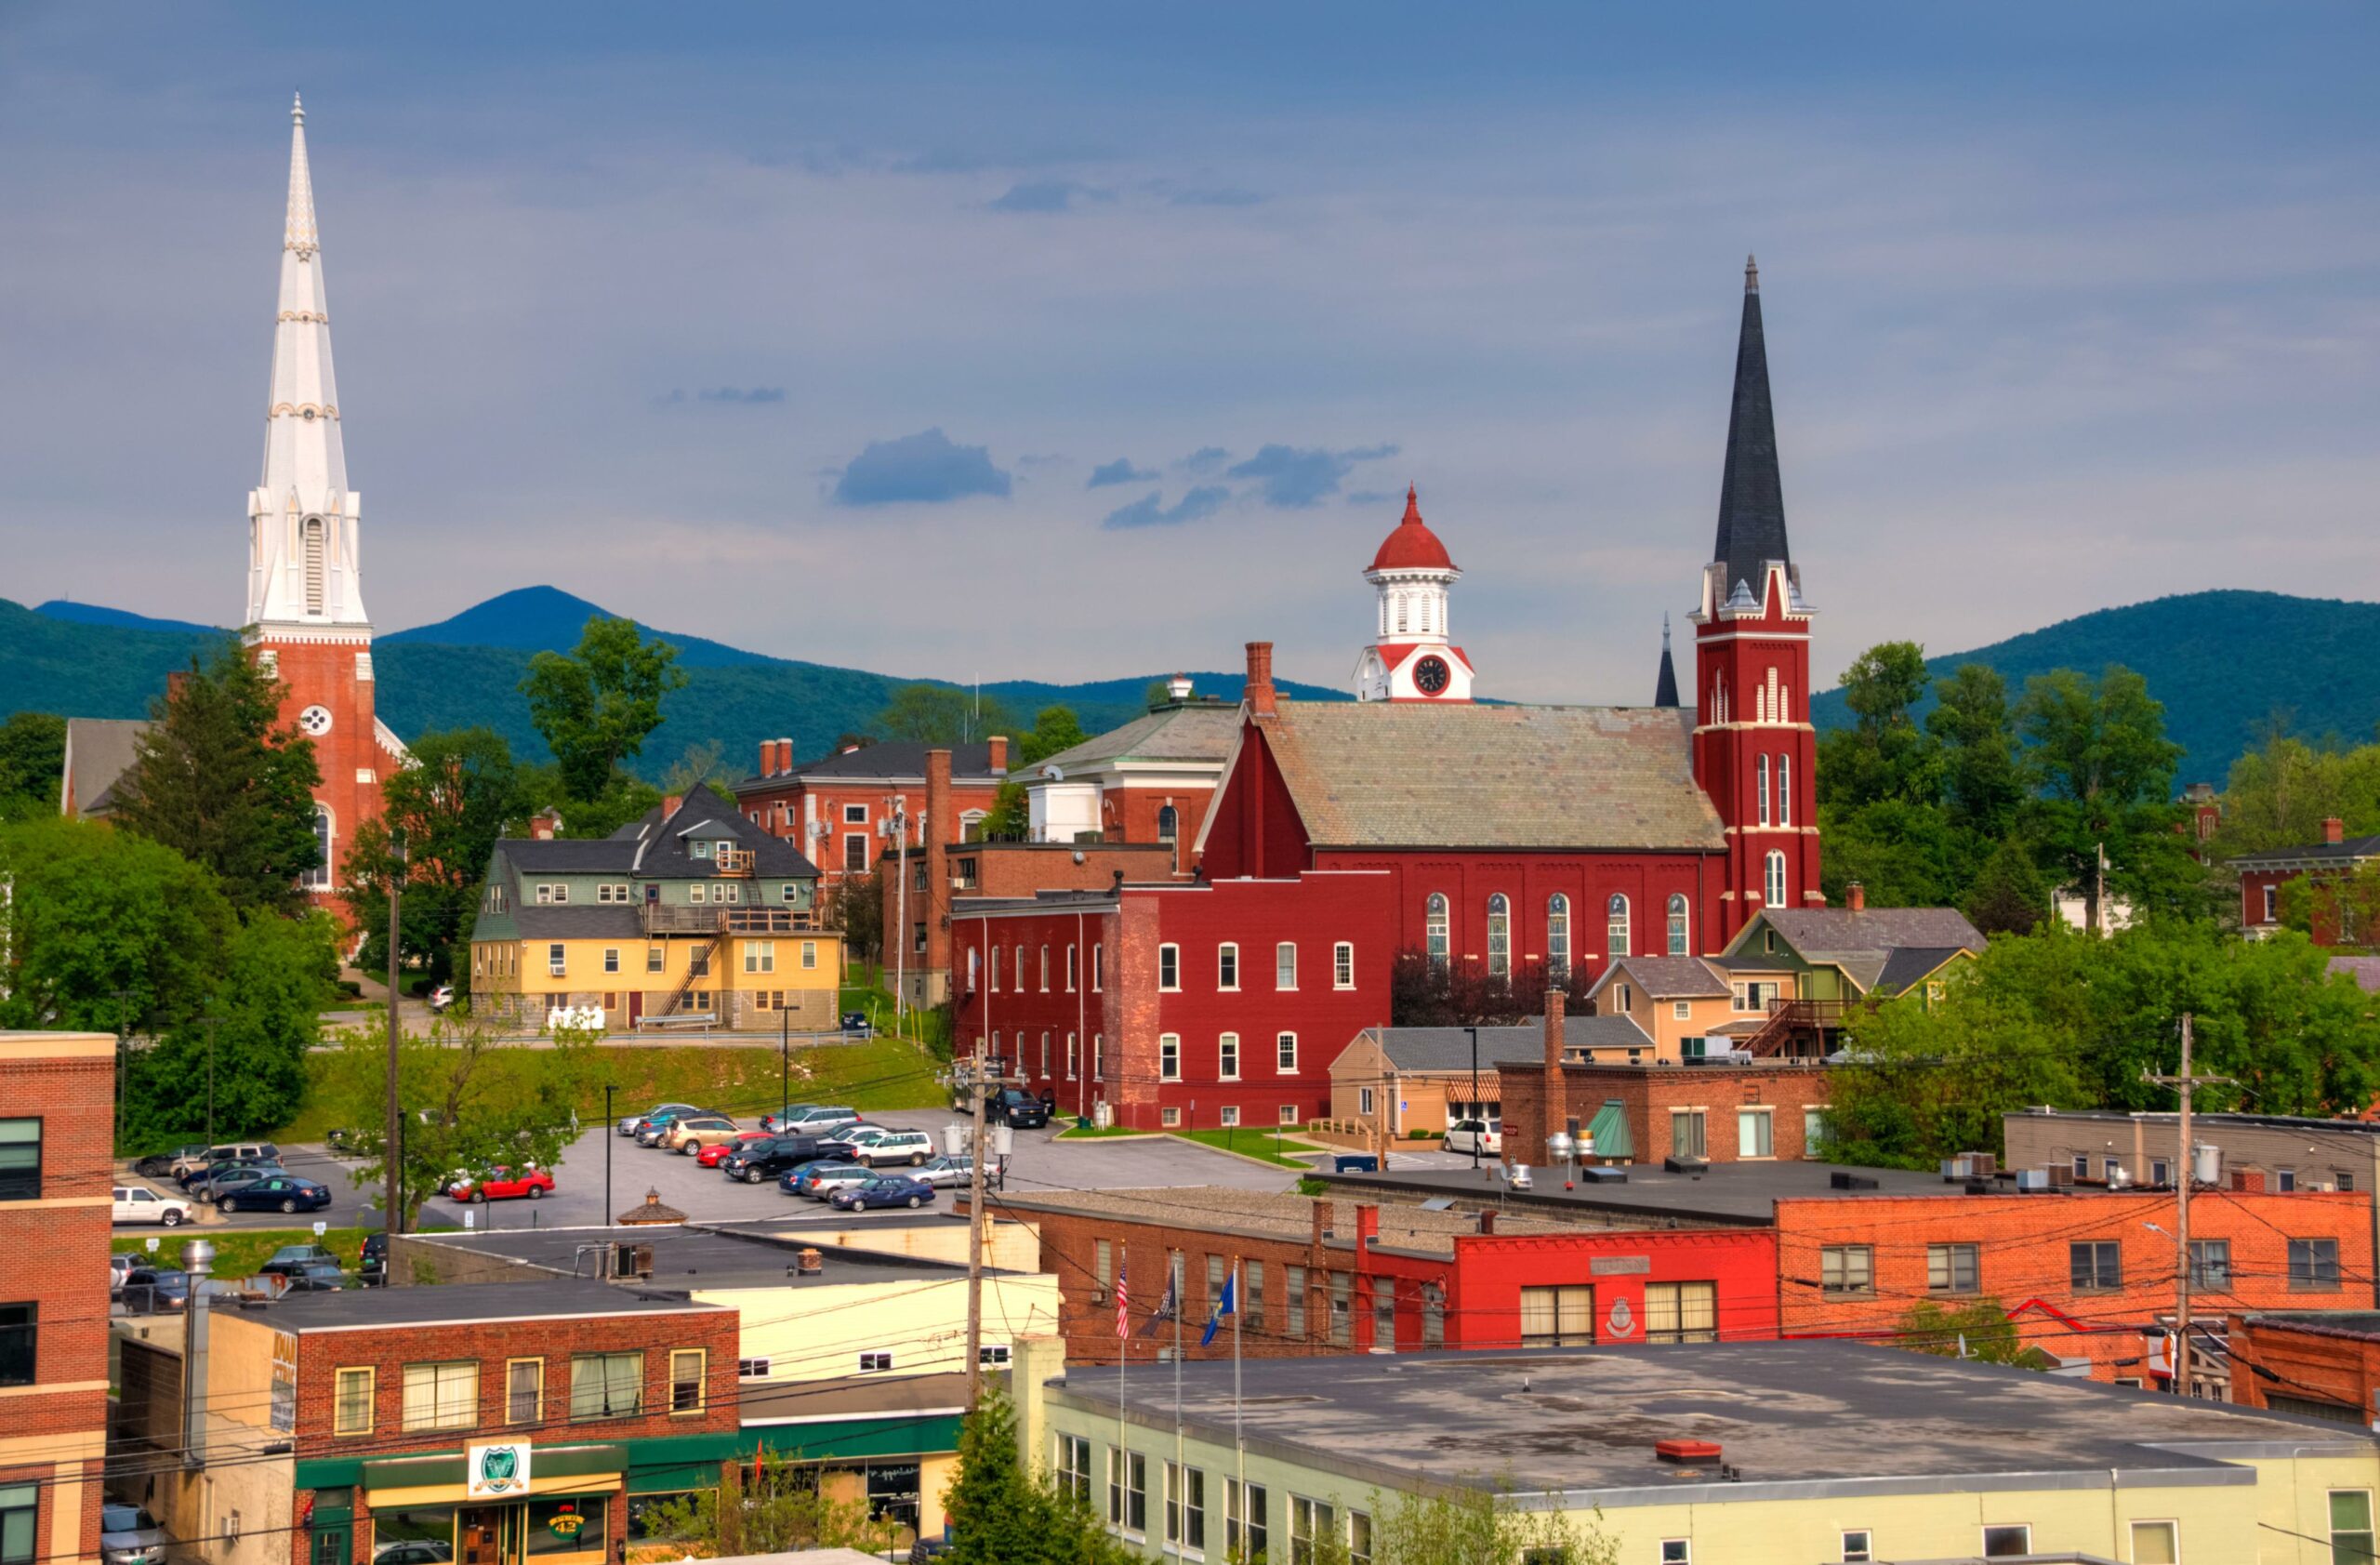 A landscape photo of Rutland, Vermont with tall, red, brick buildings and trees. 